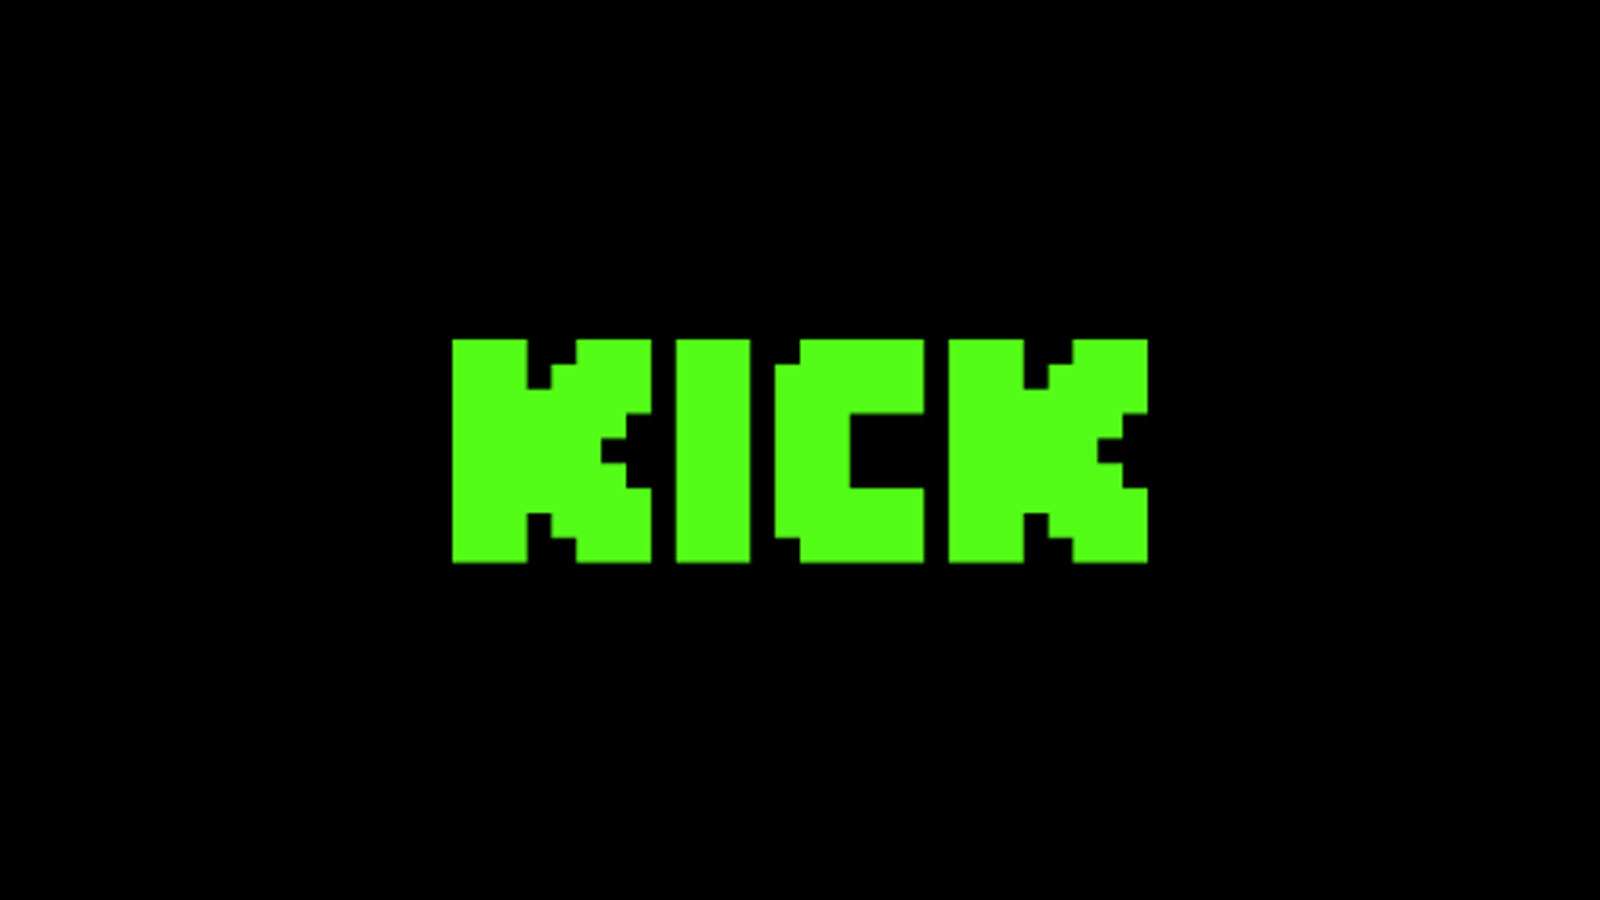 Kick.com logo in green with black background